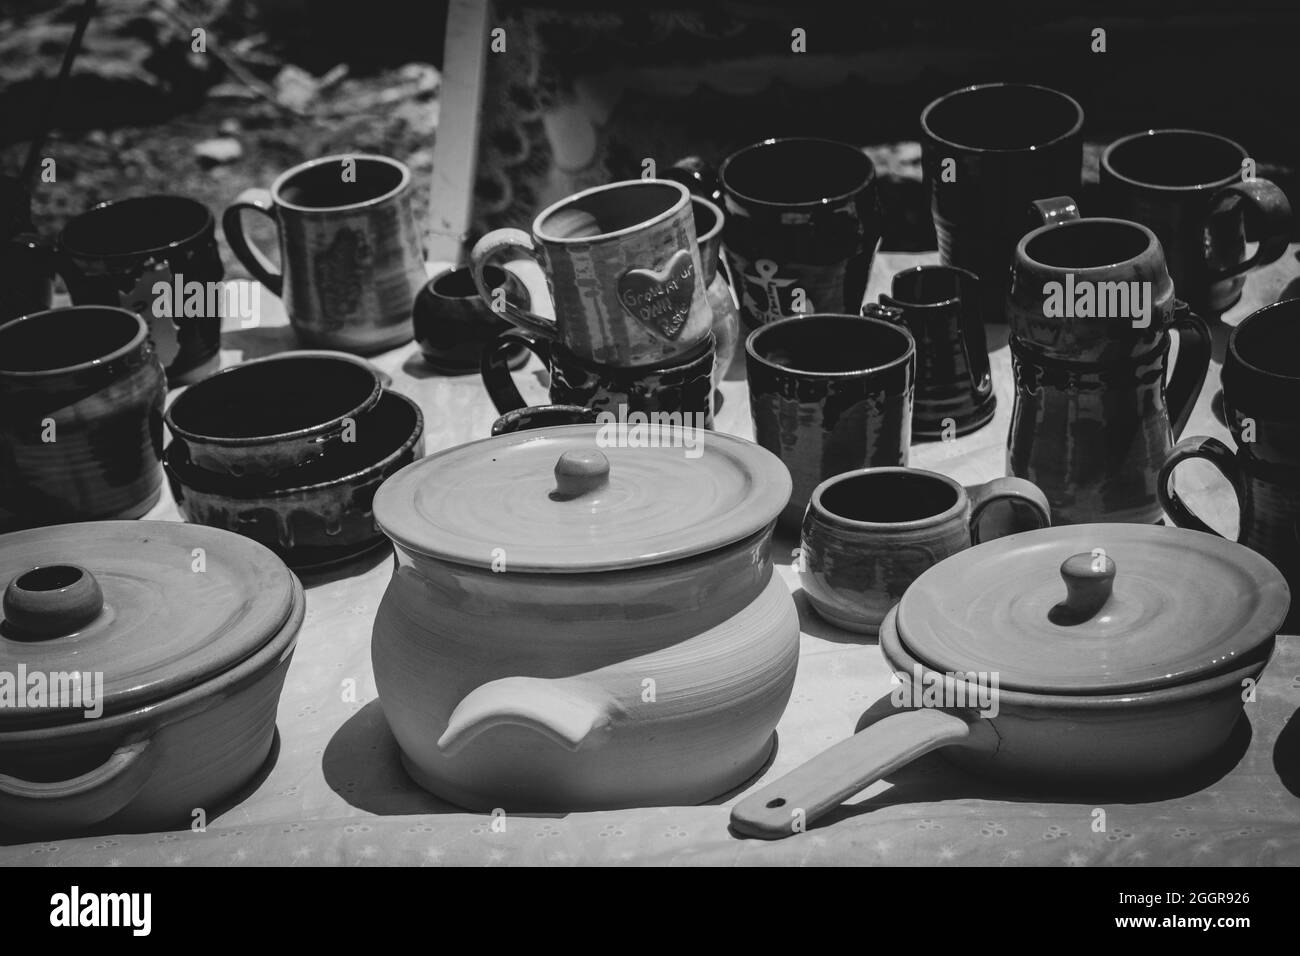 Pottery and other household items on sale at the market day. Belmopan, Belize. Stock Photo